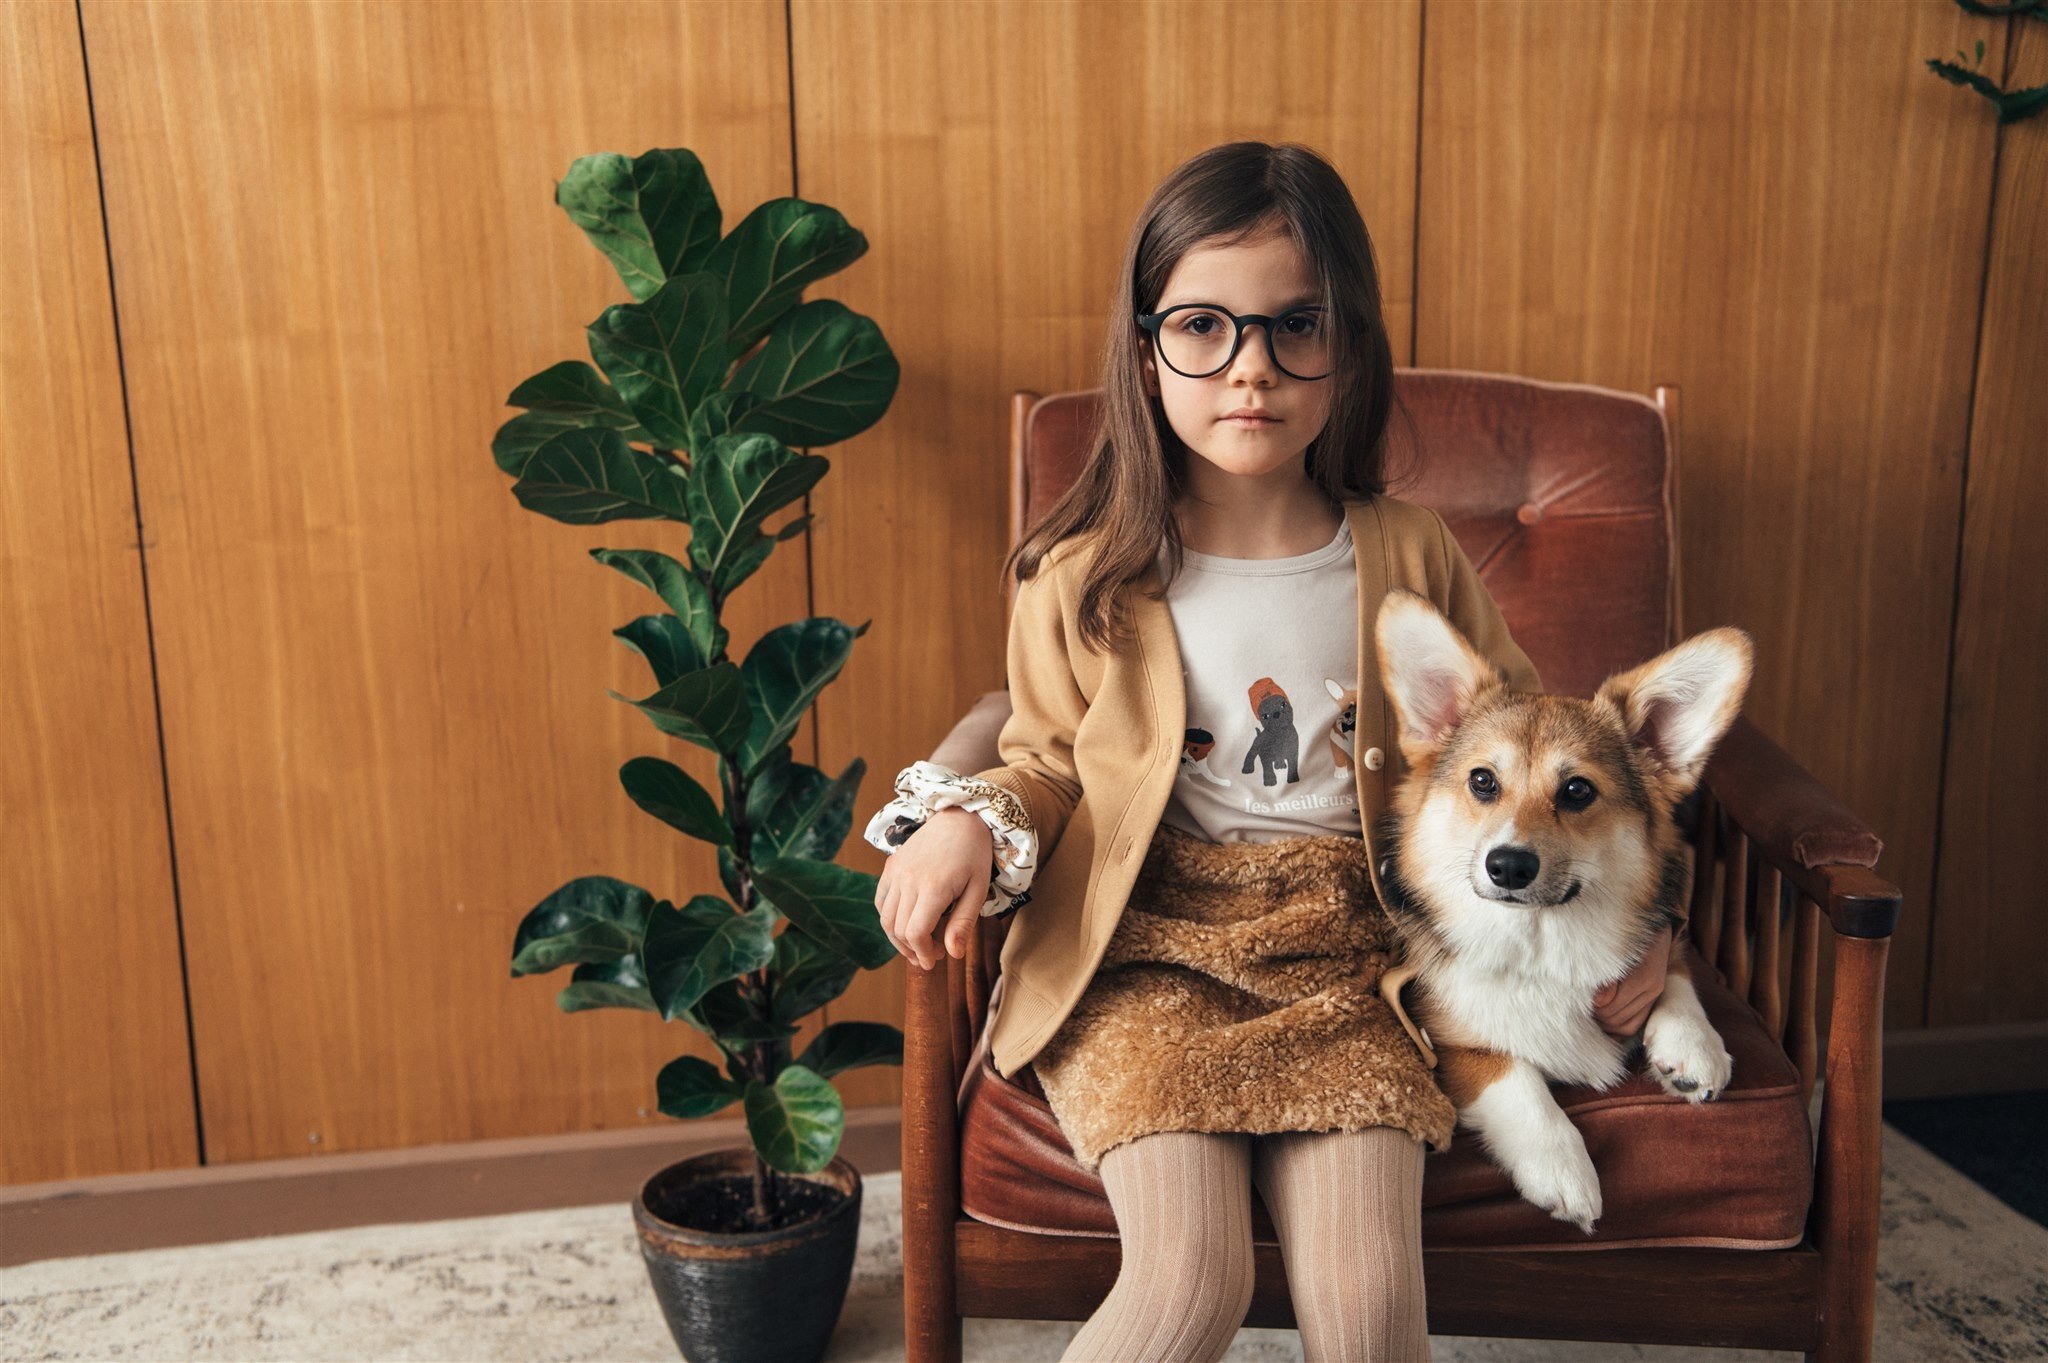 Kids clothing brand “Hebe” presents new collection Parisian dream